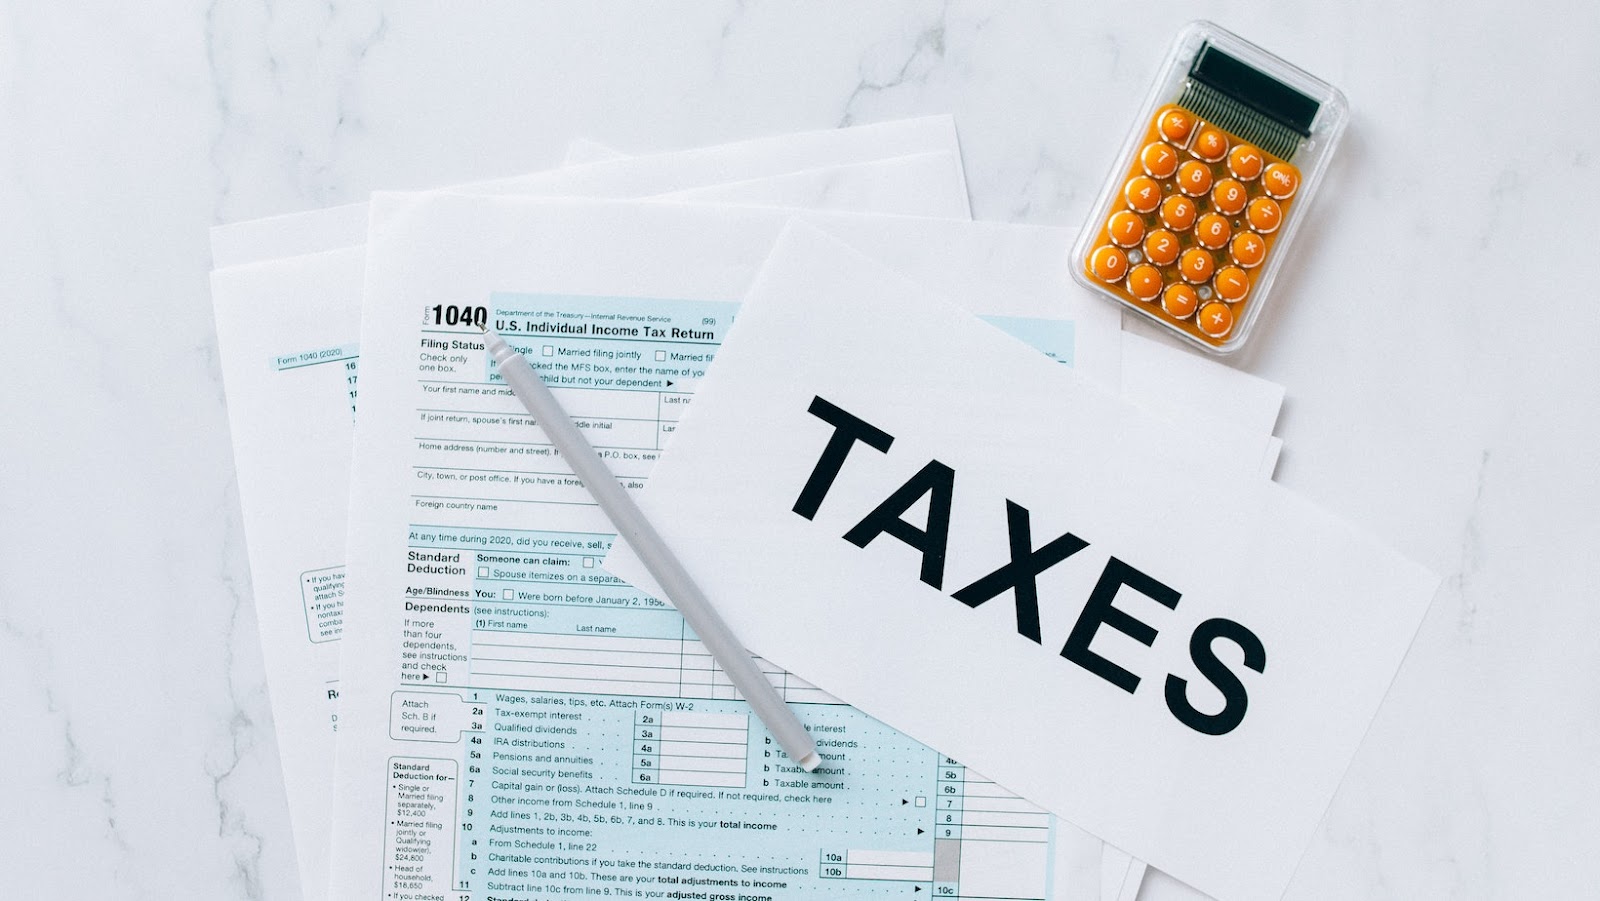 tax preparation software can help prepare and file your taxes by _________.